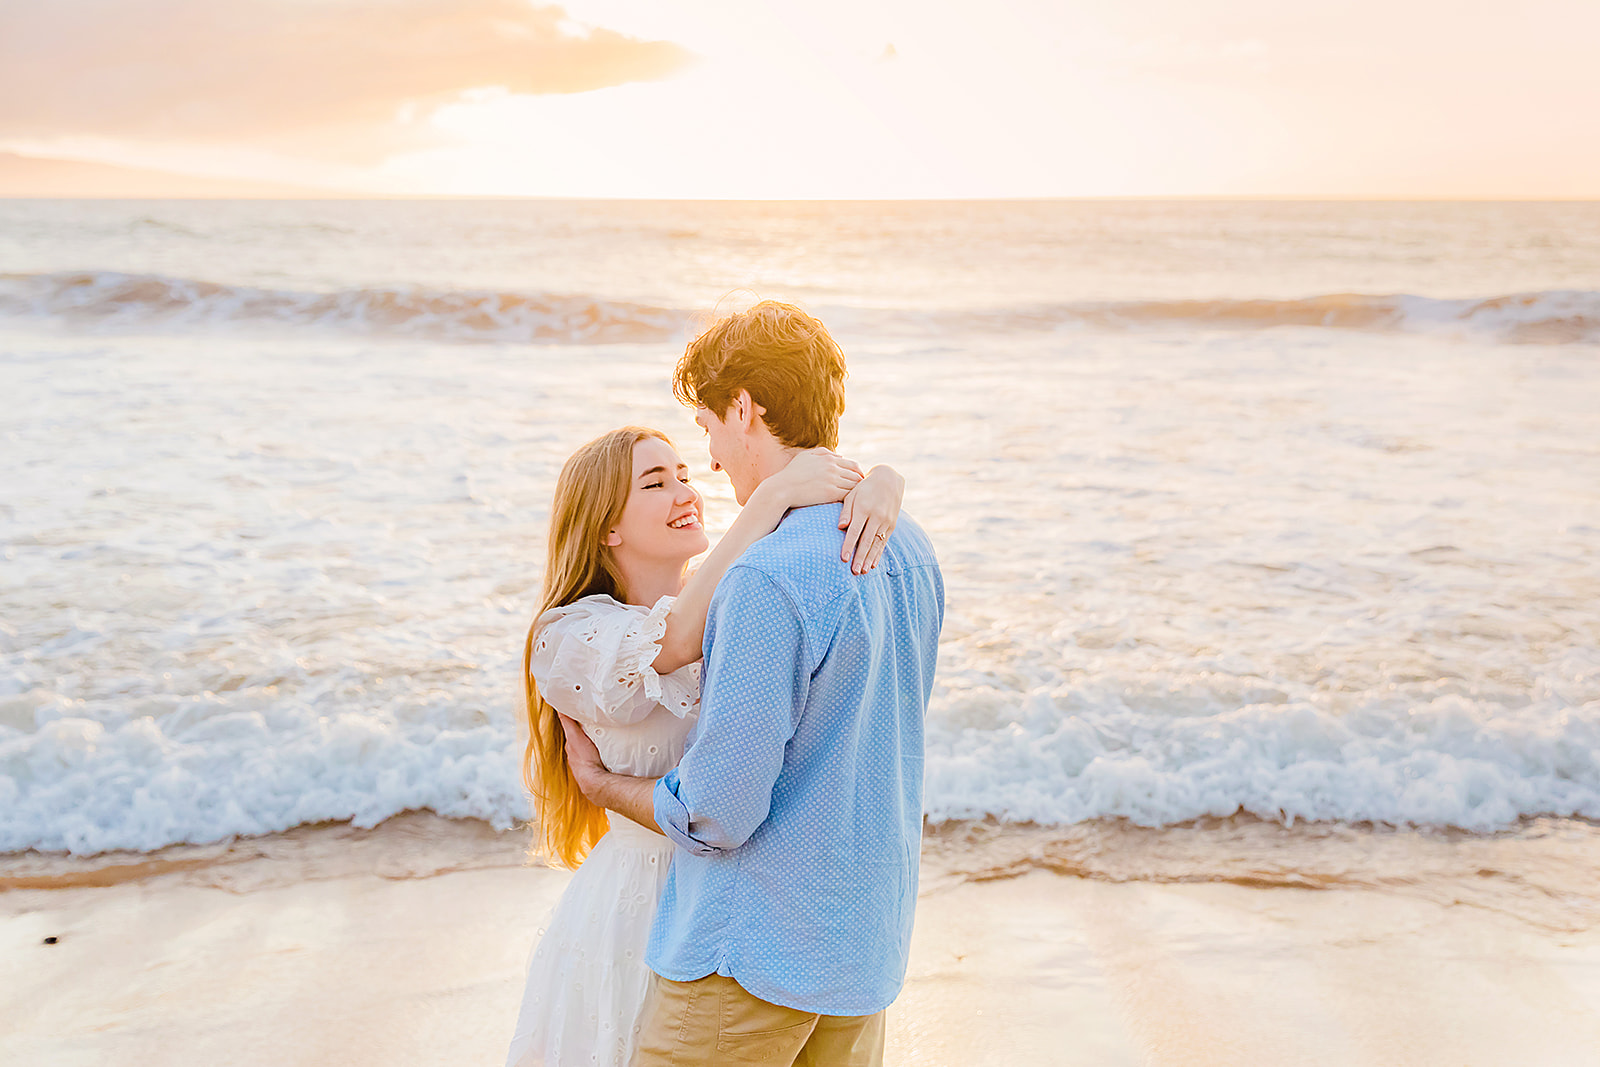 Love + Water Photography captures Mia Maples Maui engagement photos on the beach as she embraces and smiles at her fiance in front of the ocean.